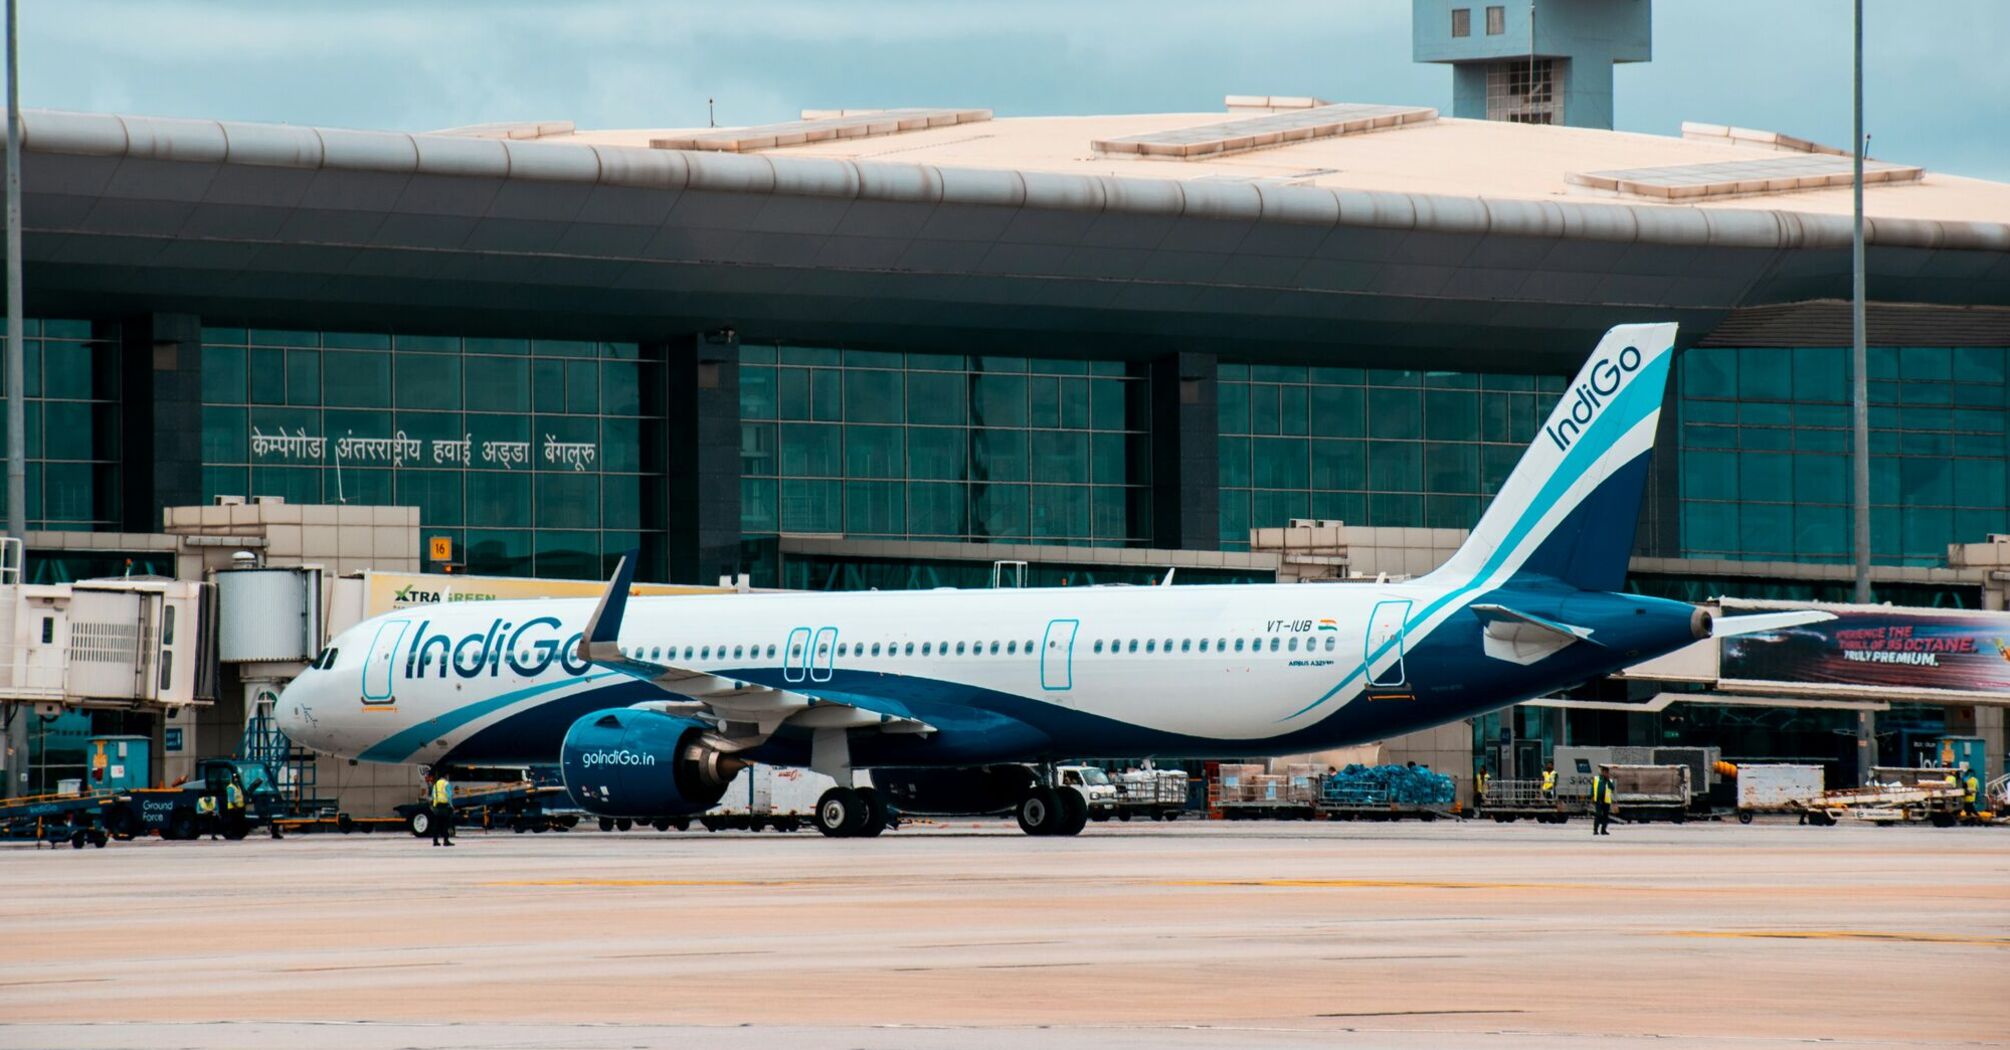 Indigo airplane is parked at an airport